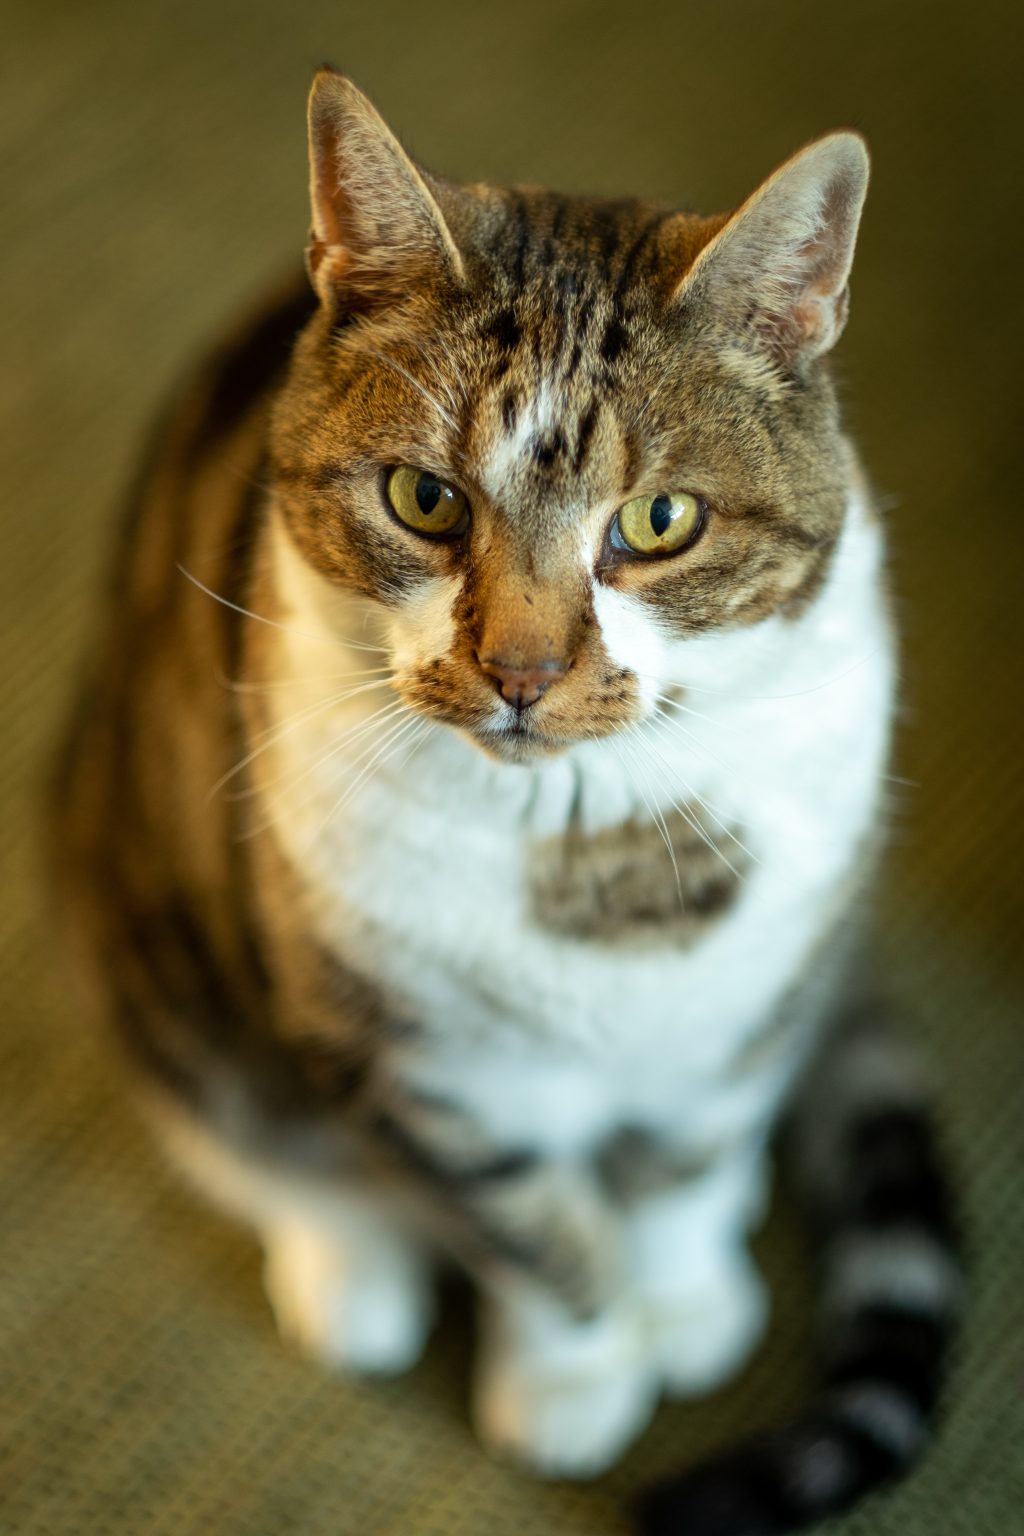 Portrait of an adult brown and white cat sitting on the floor. Photo contributed by Roy Tanck to the WordPress Photo Directory.